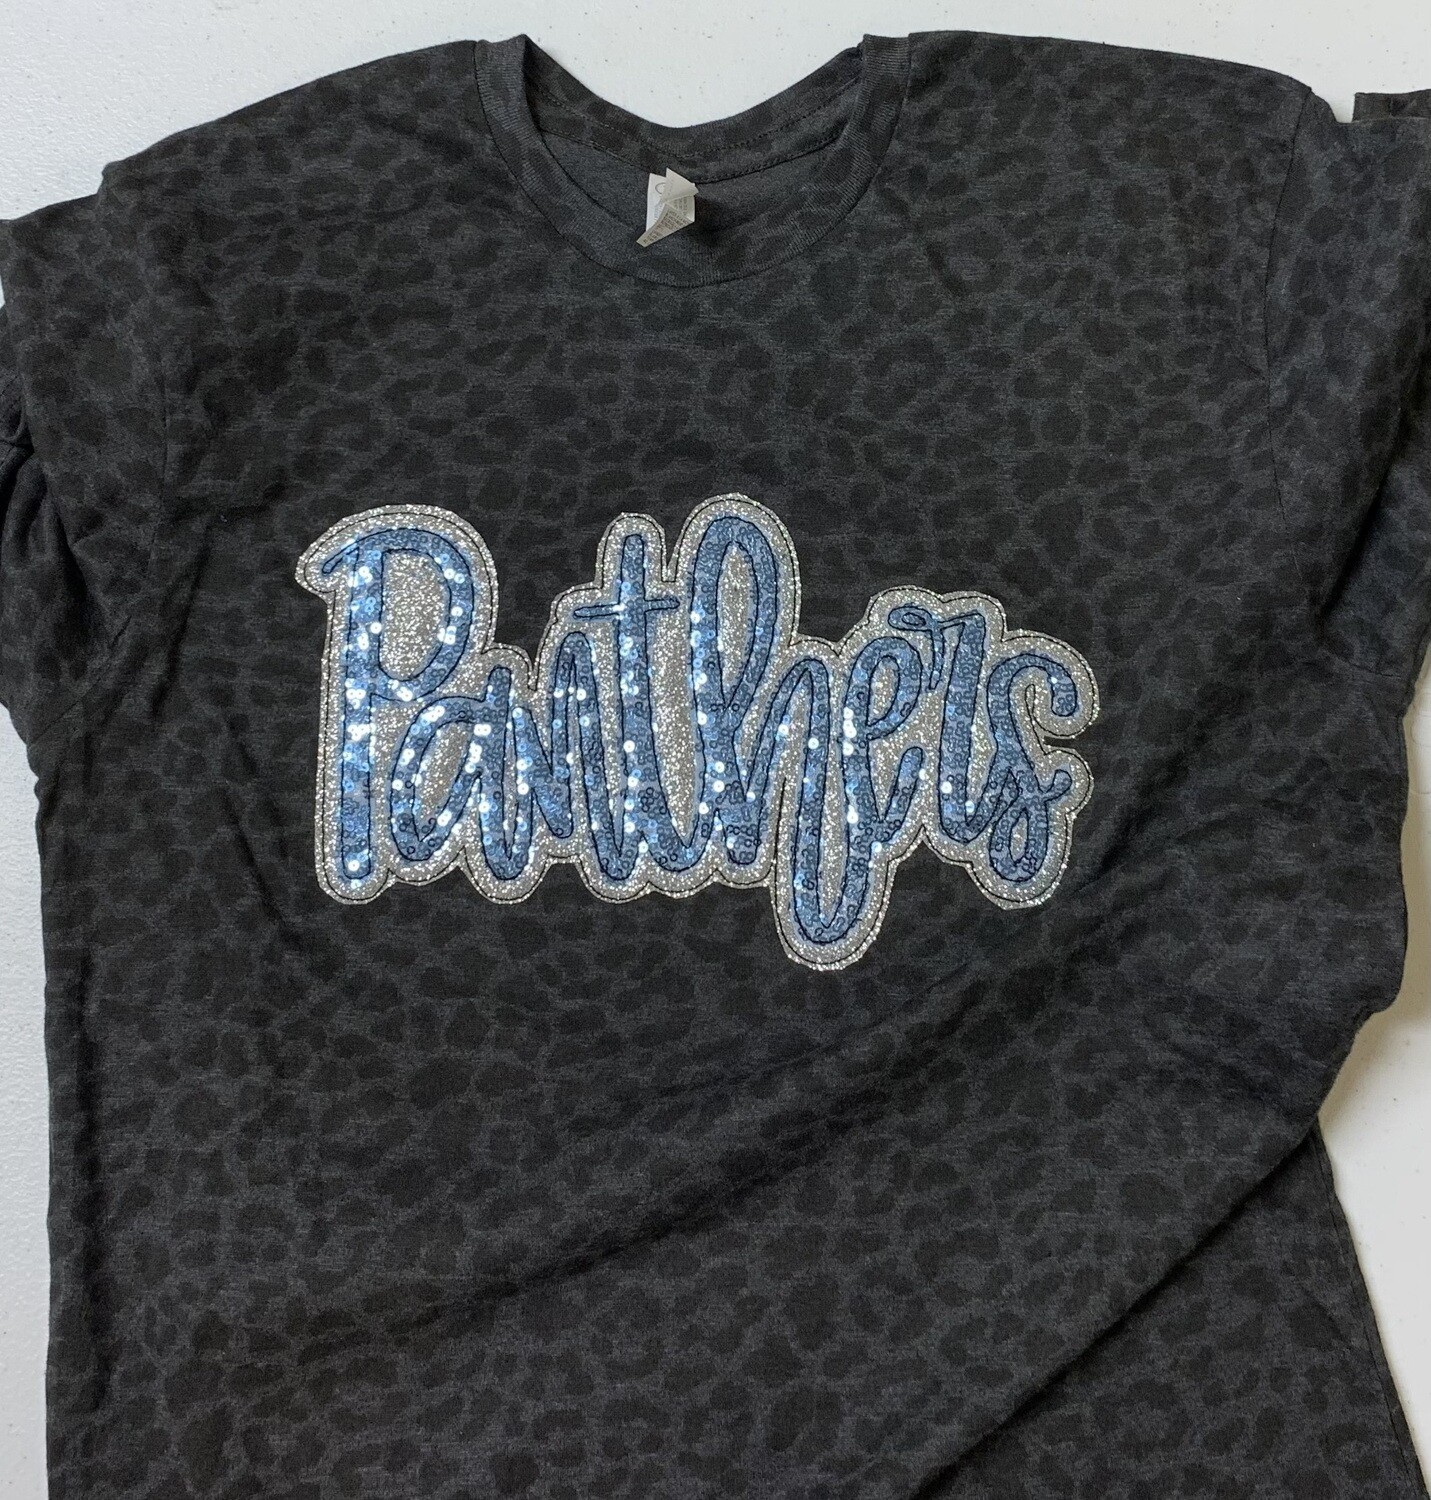 Sequin Panthers Black Leopard Print Fine Jersey Tee